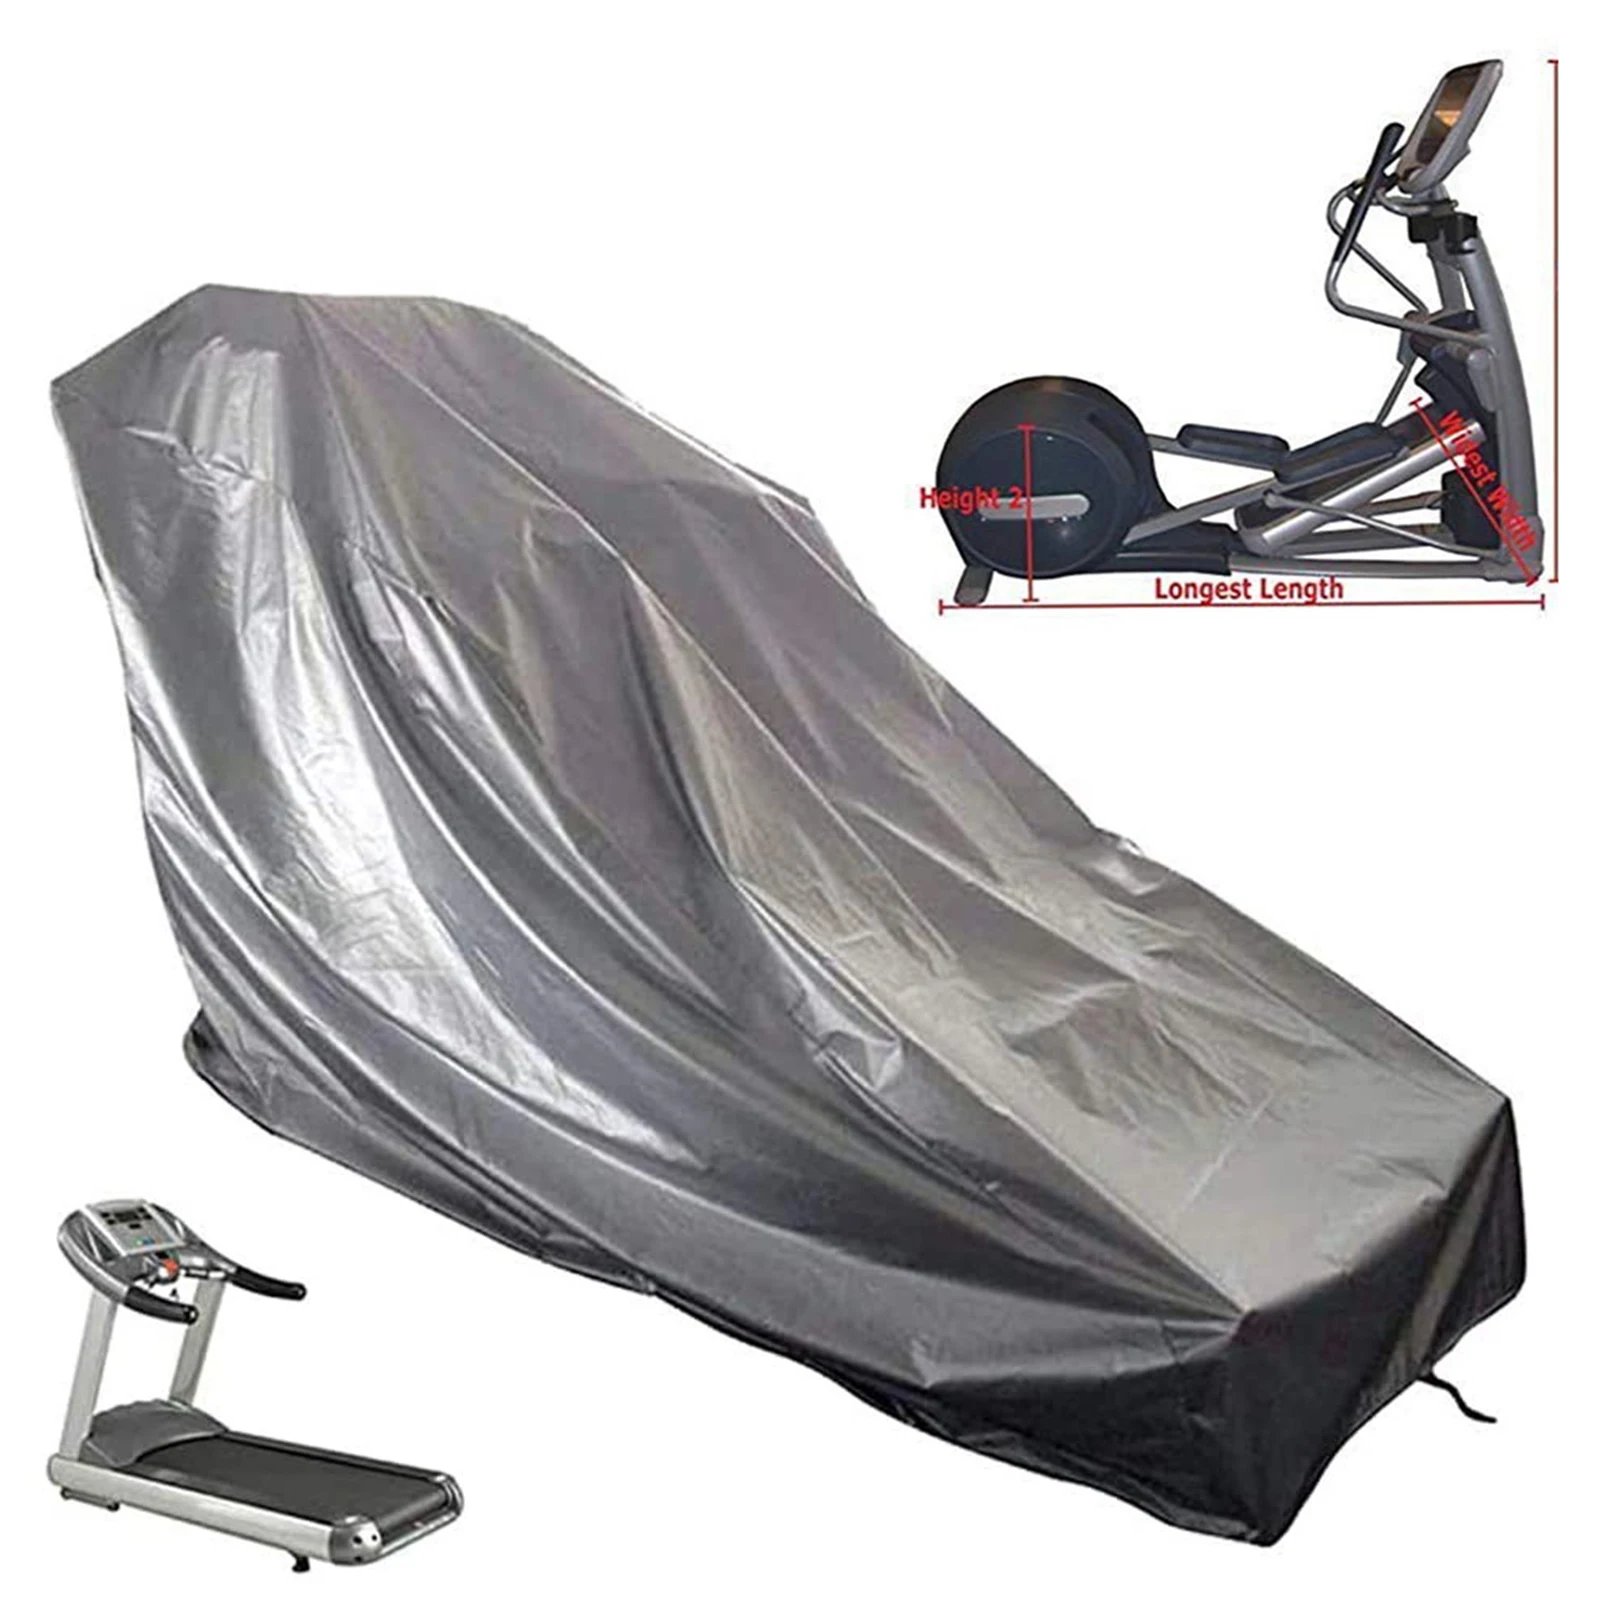 Portable Treadmill Cover Dust-Proof Windproof Oxford Cloth Exercise Bike Cover Protective Covers Bike Accessories